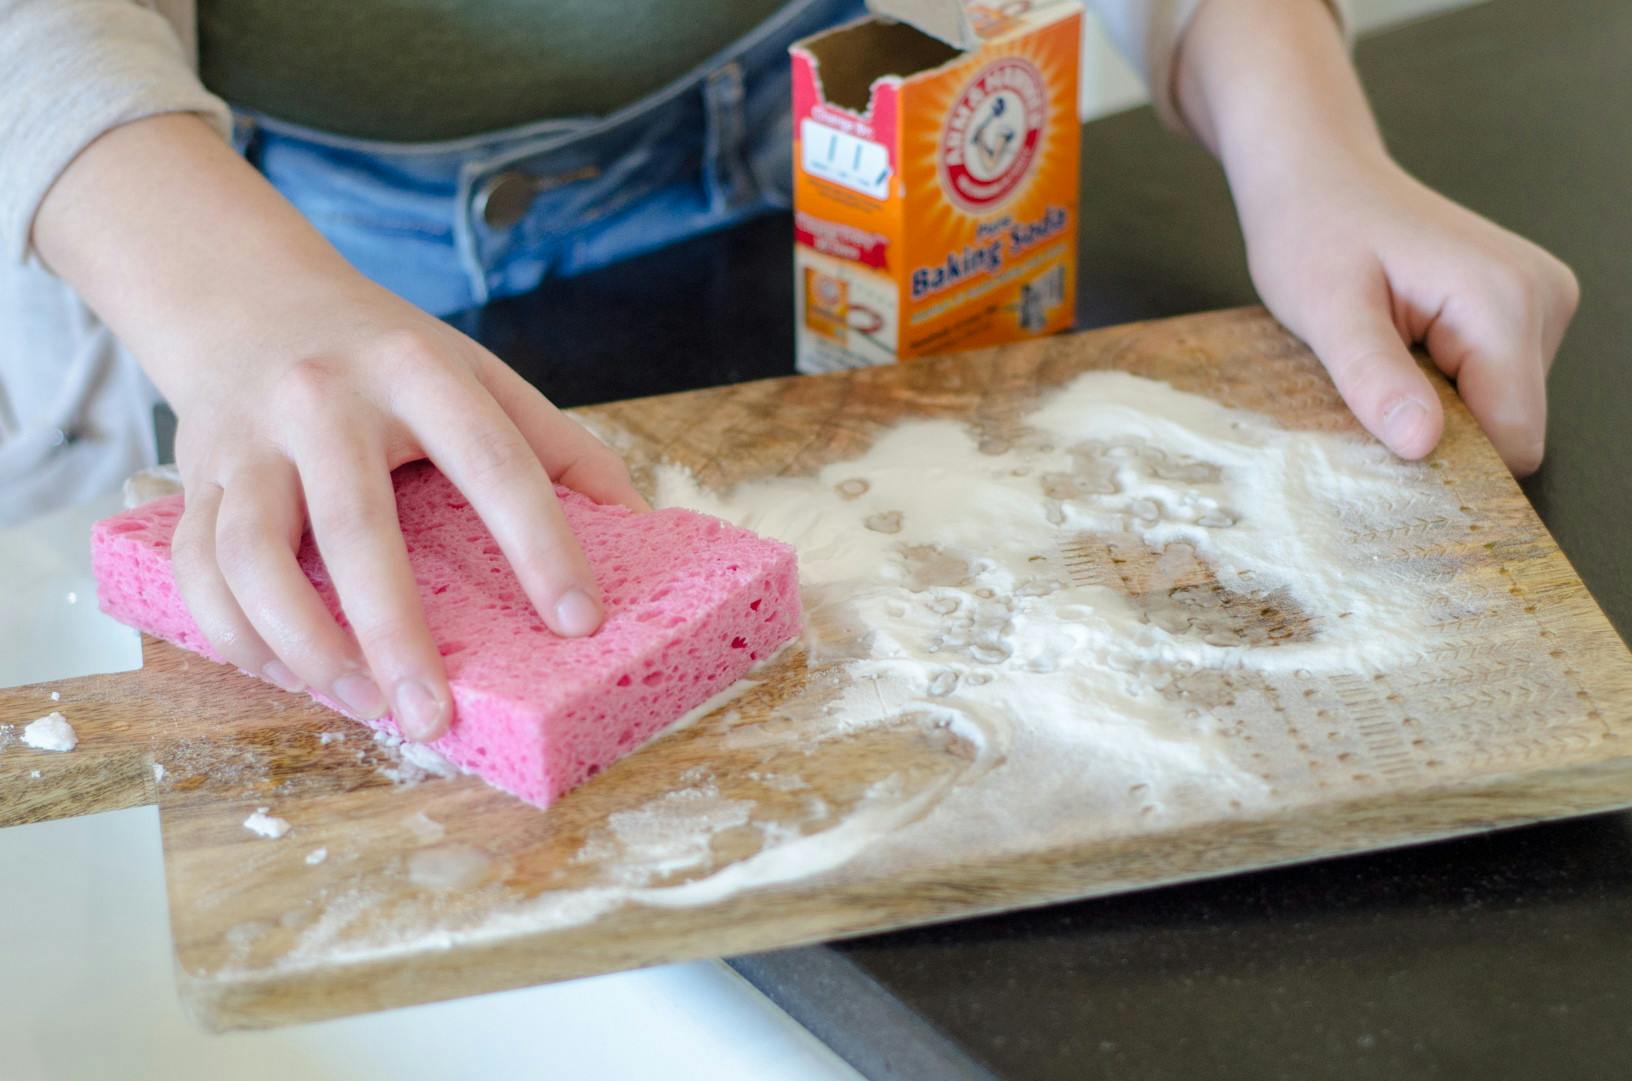 Sprinkle baking soda on wood cutting boards to deep clean.